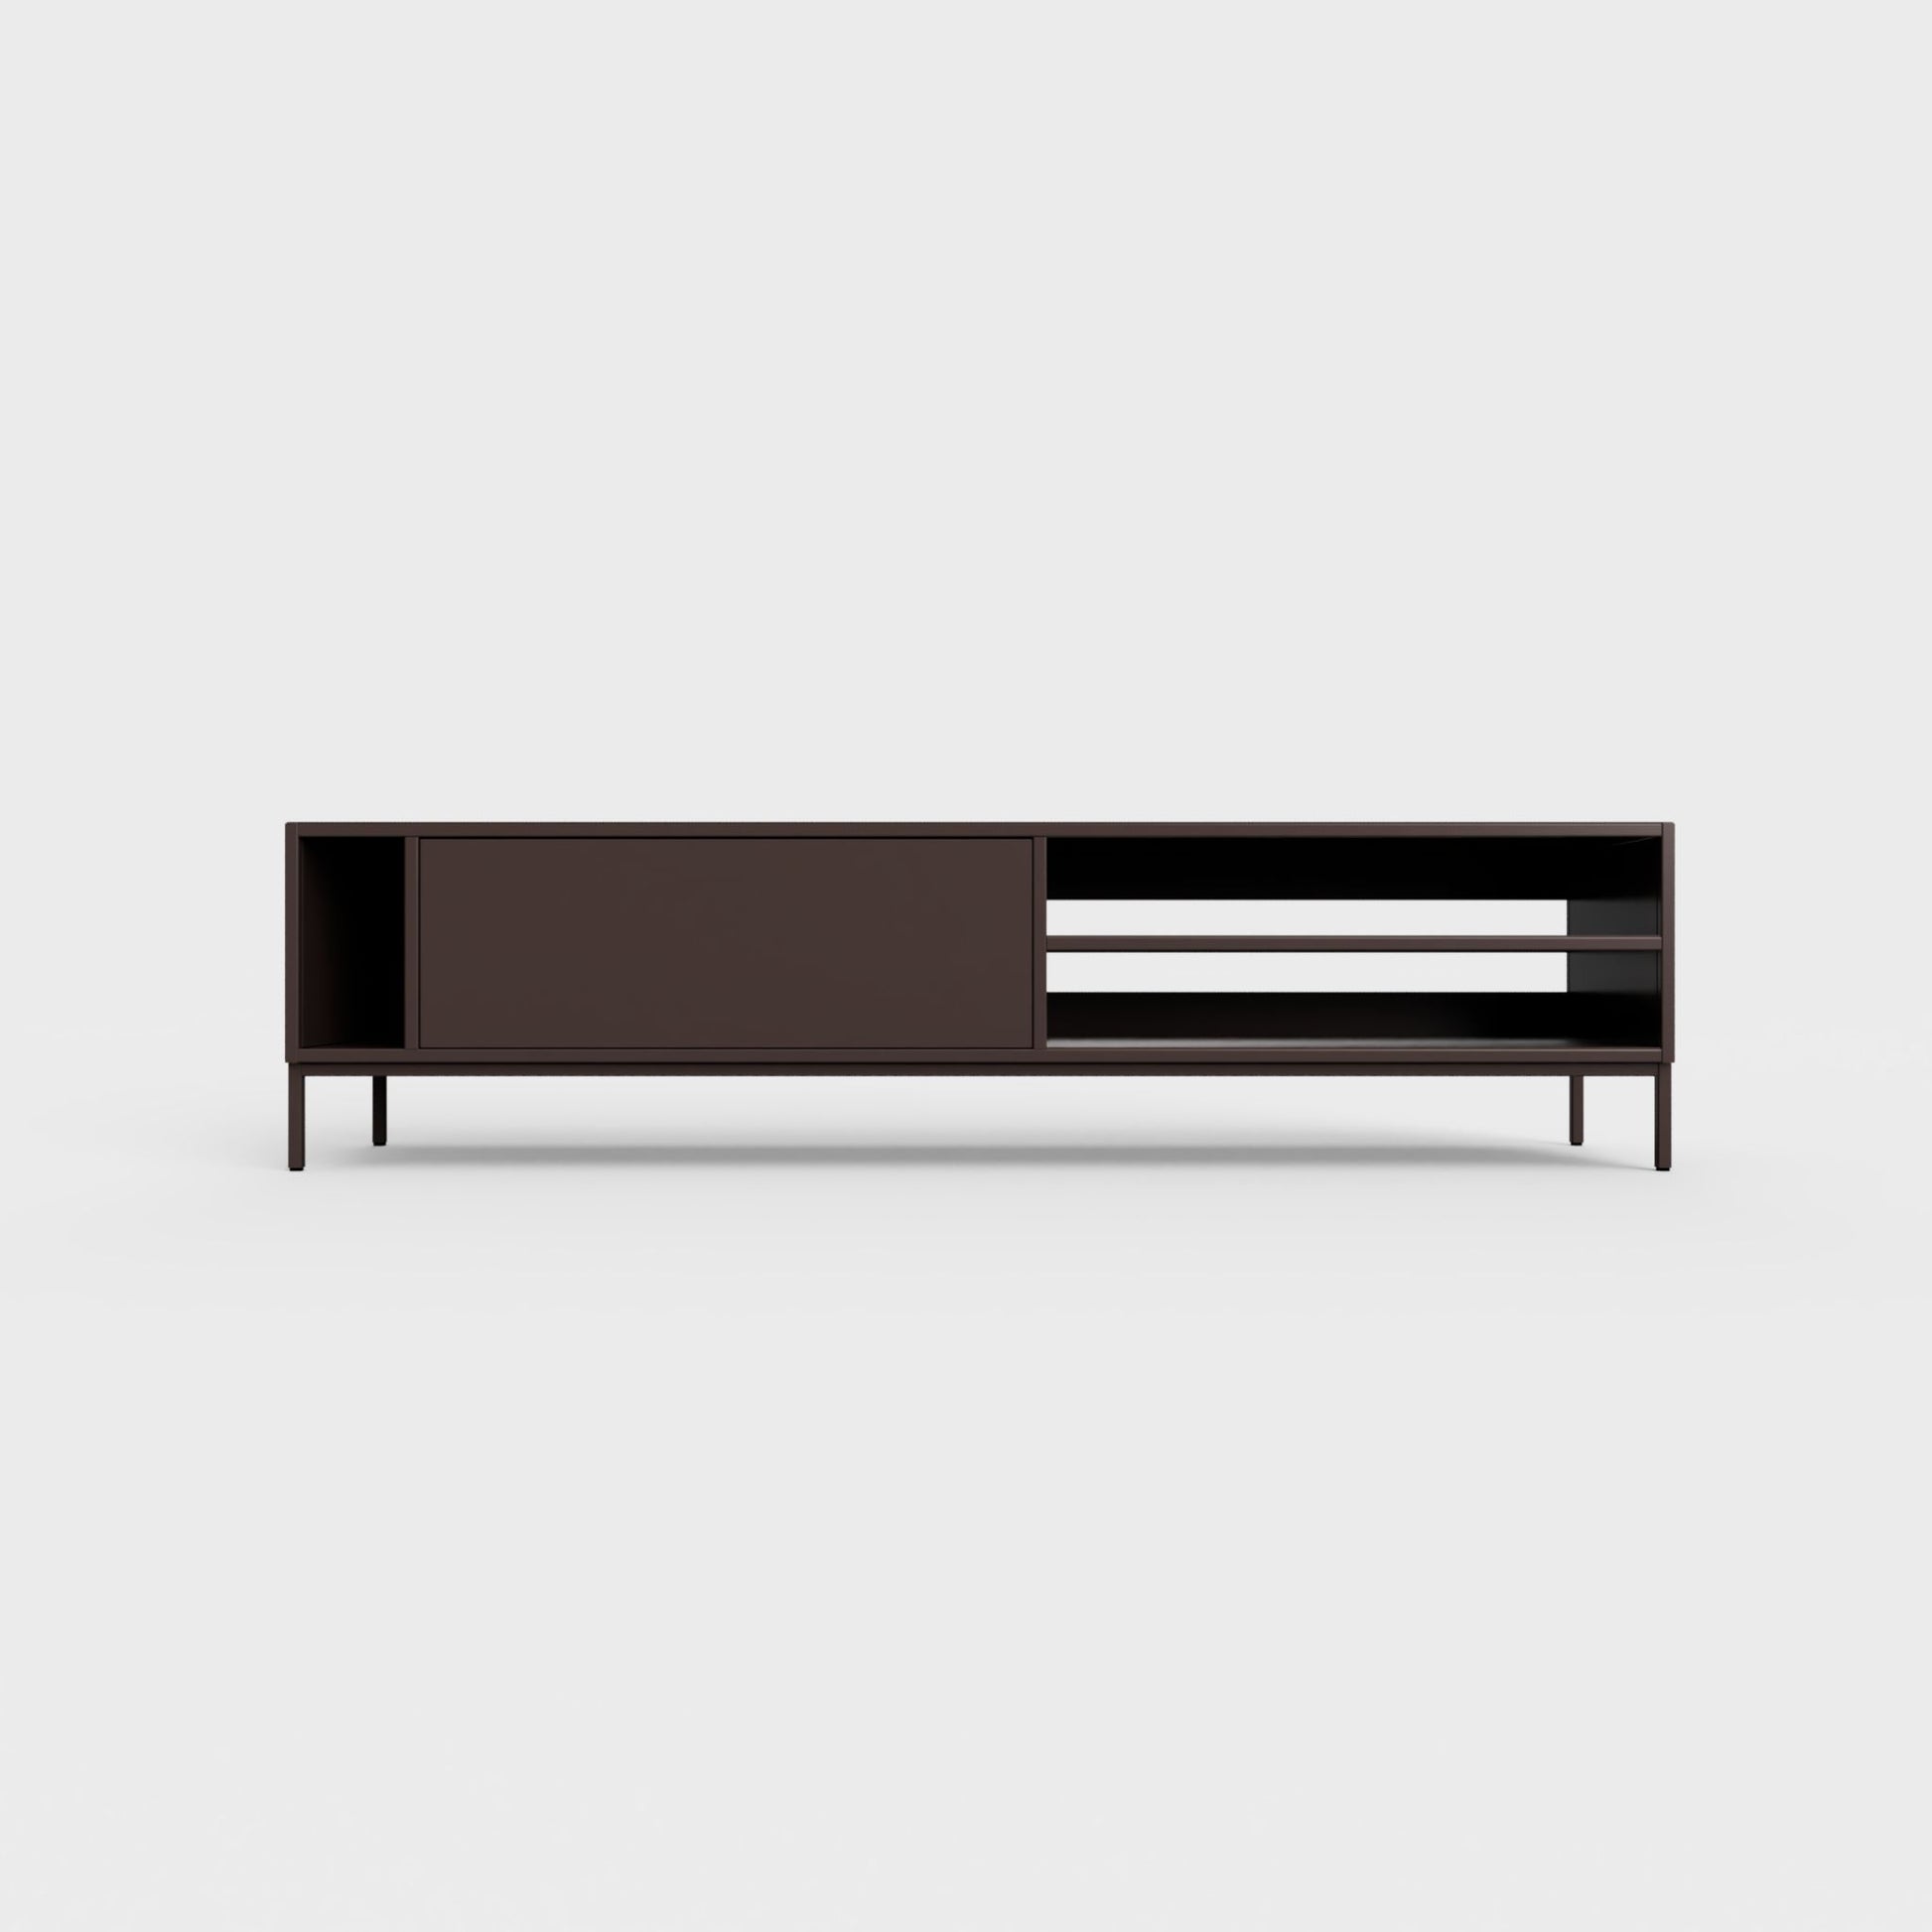 Prunus 03 Lowboard in coffee brown color, powder-coated steel, elegant and modern piece of furniture for your living room